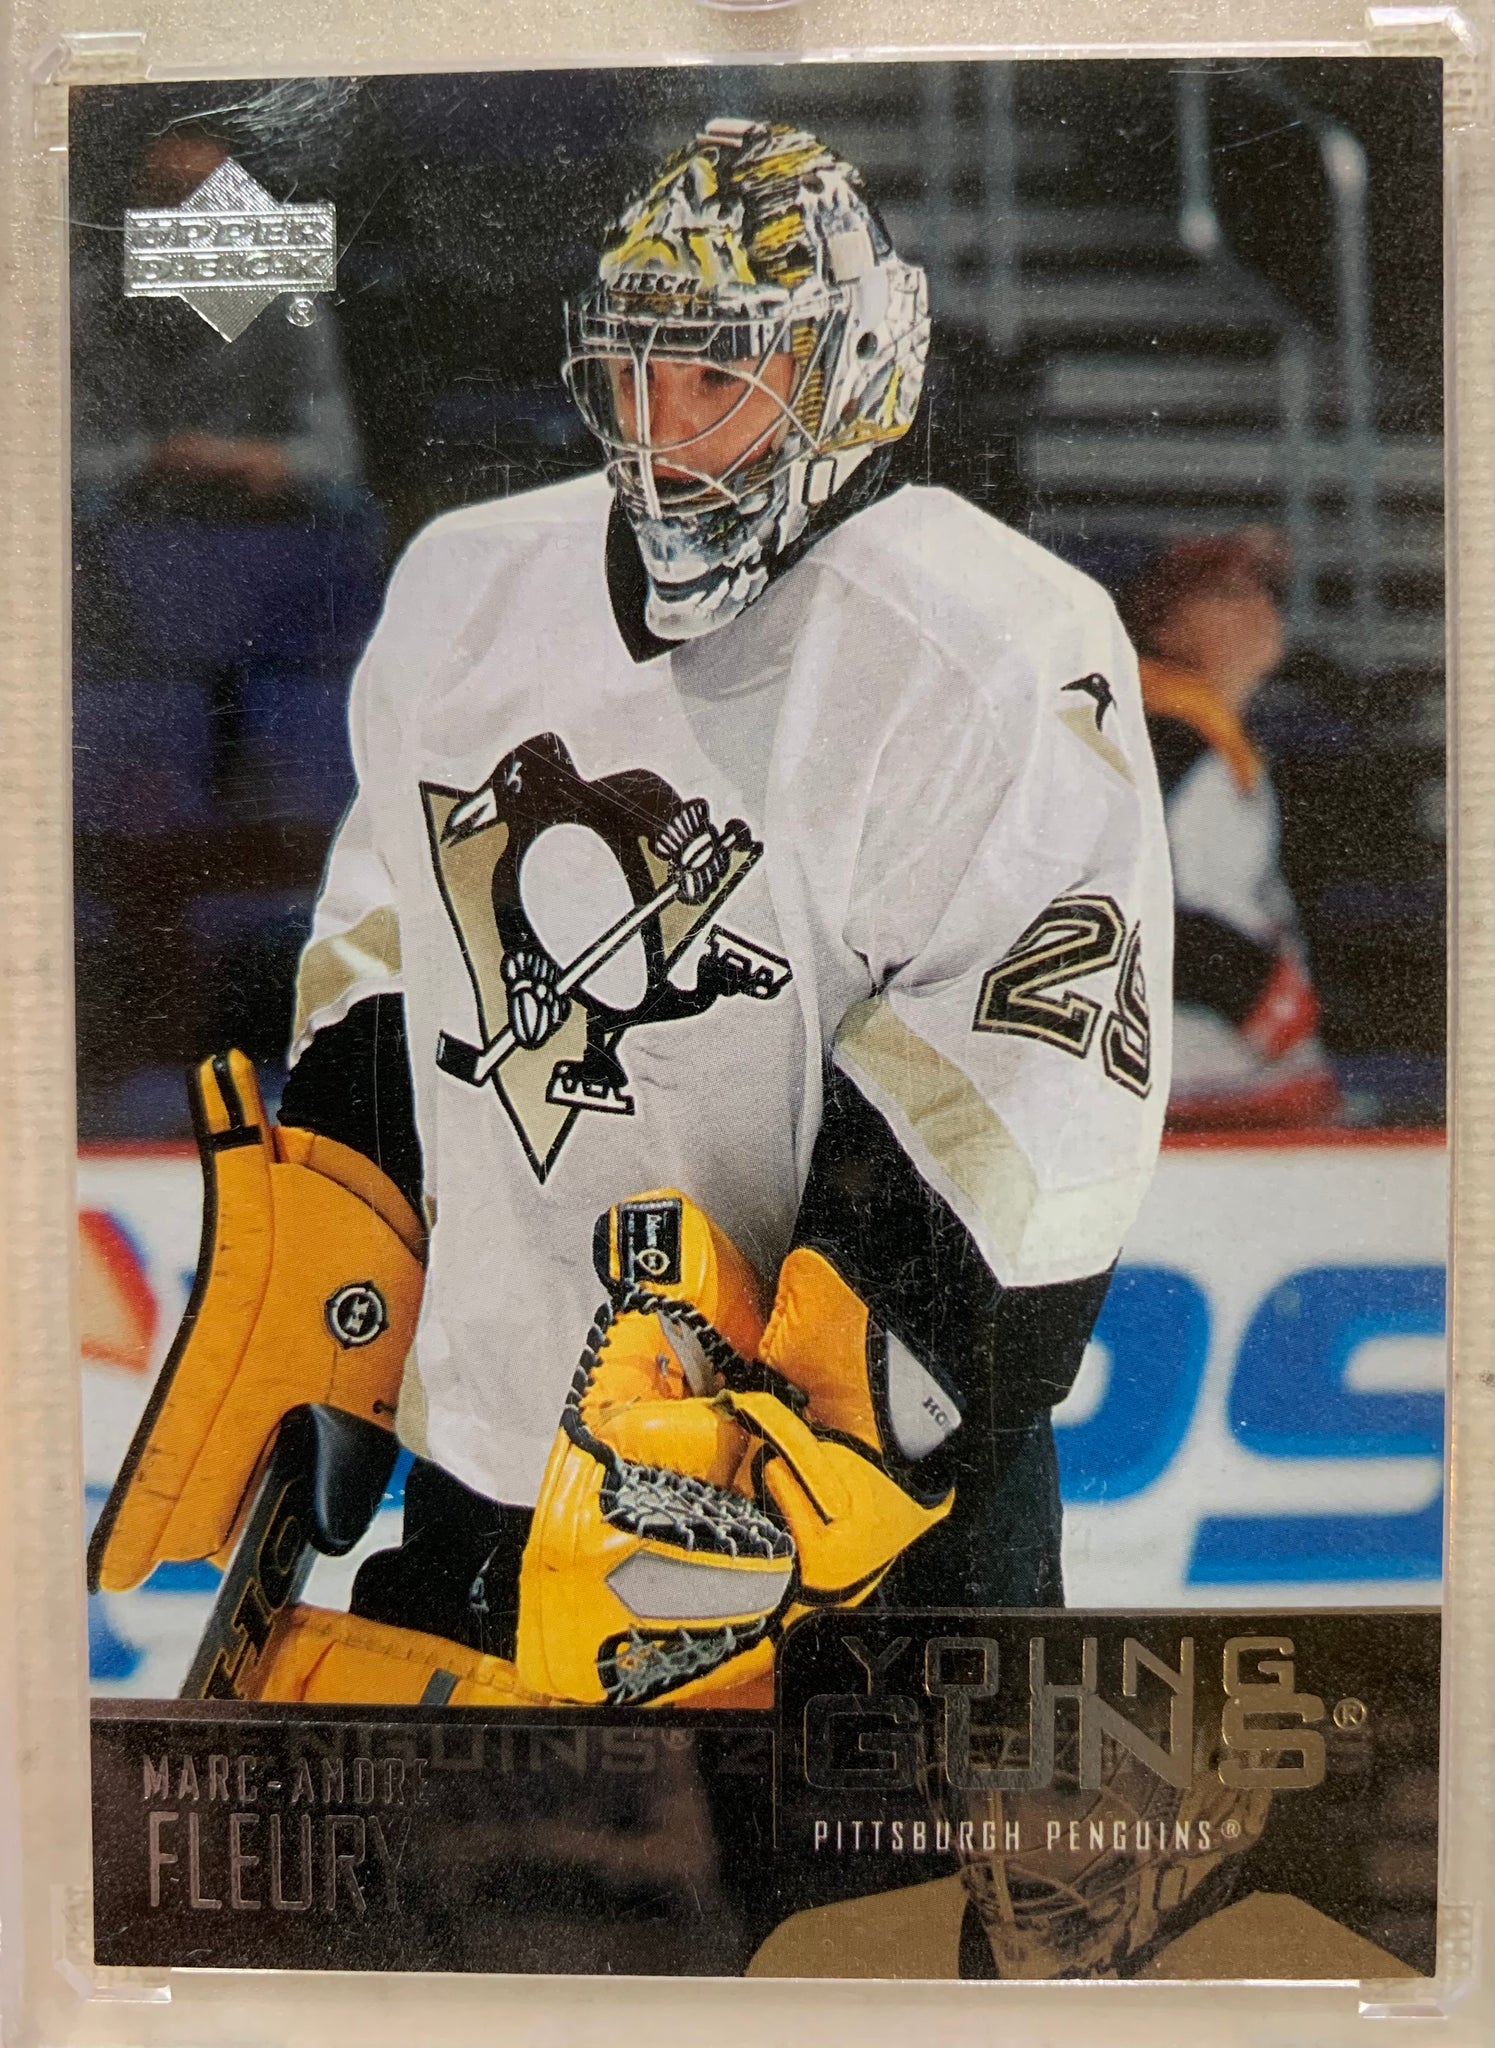 2003-04 UPPER DECK HOCKEY #234 PITTSBURGH PENGUINS - MARC ANDRE FLEURY YOUNG GUNS ROOKIE CARD RAW